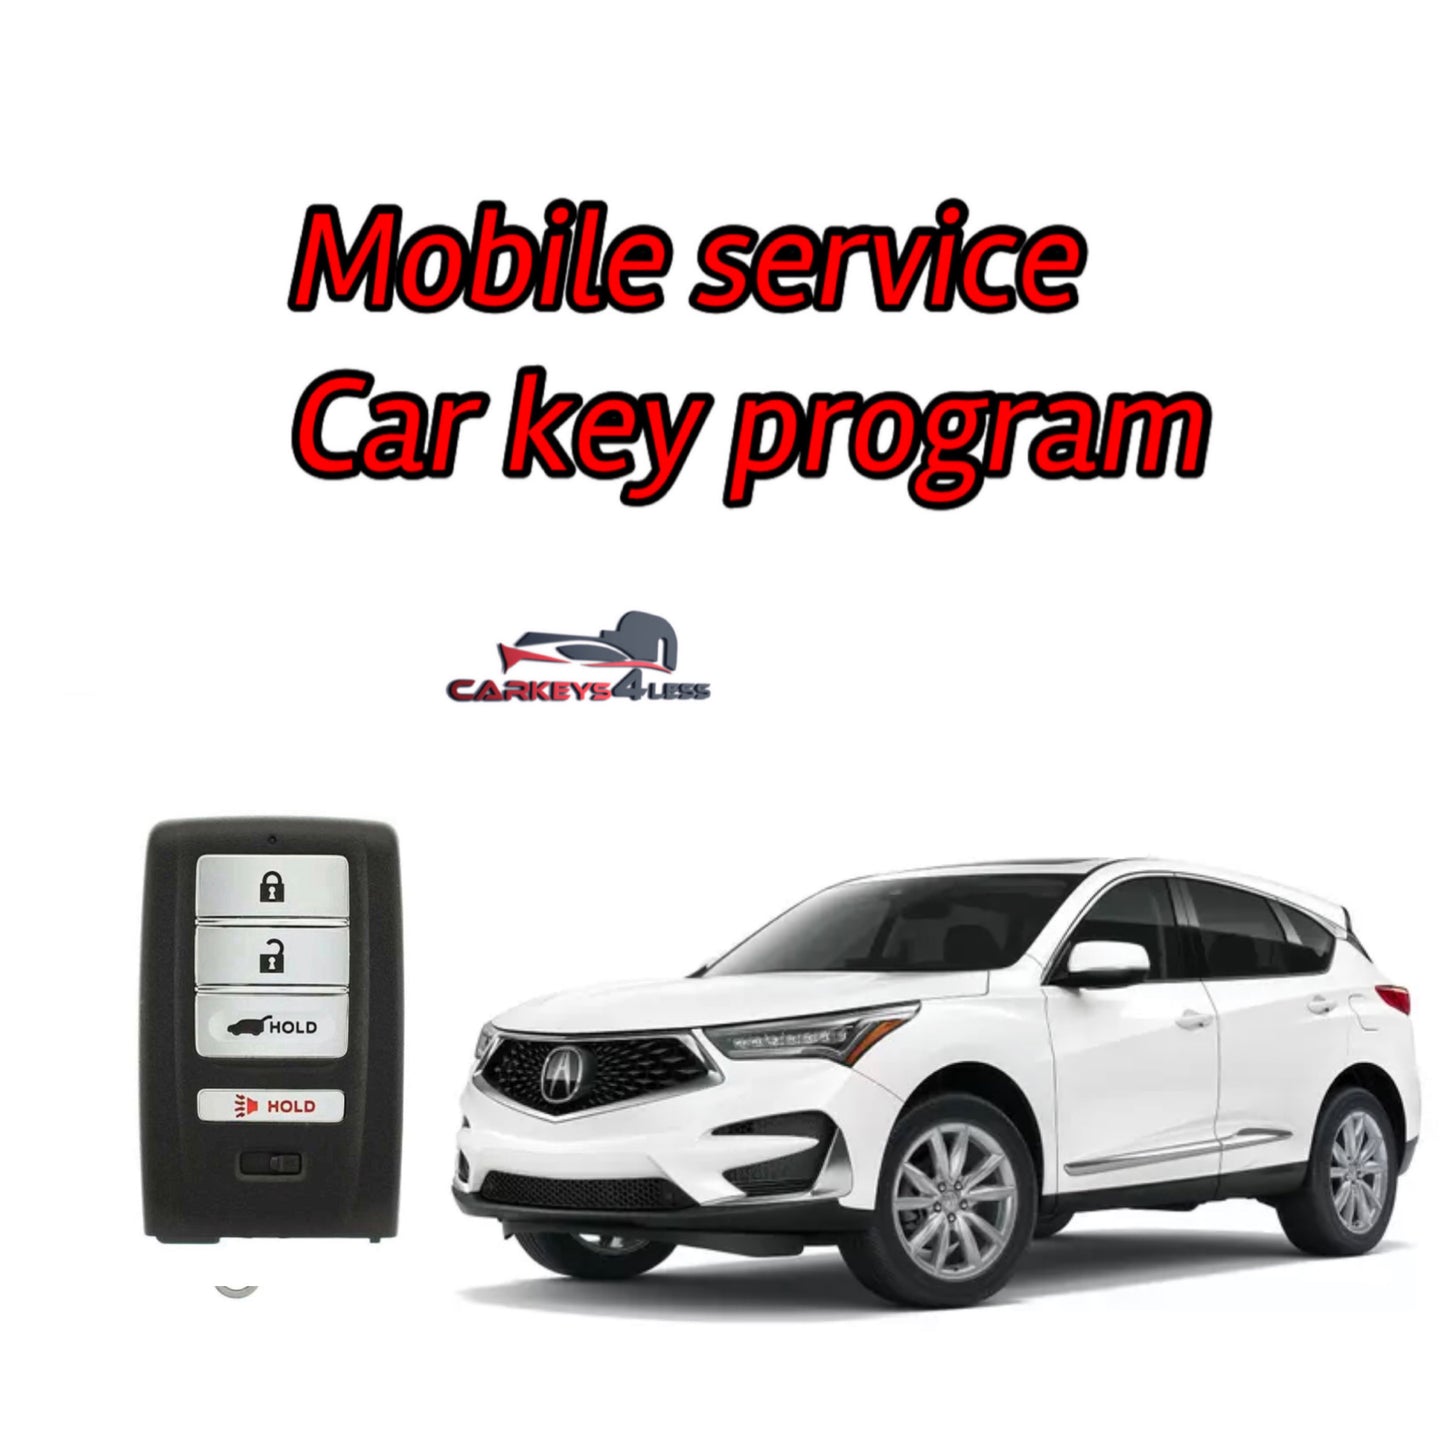 Mobile service for an aftermarket car key replacement for acura